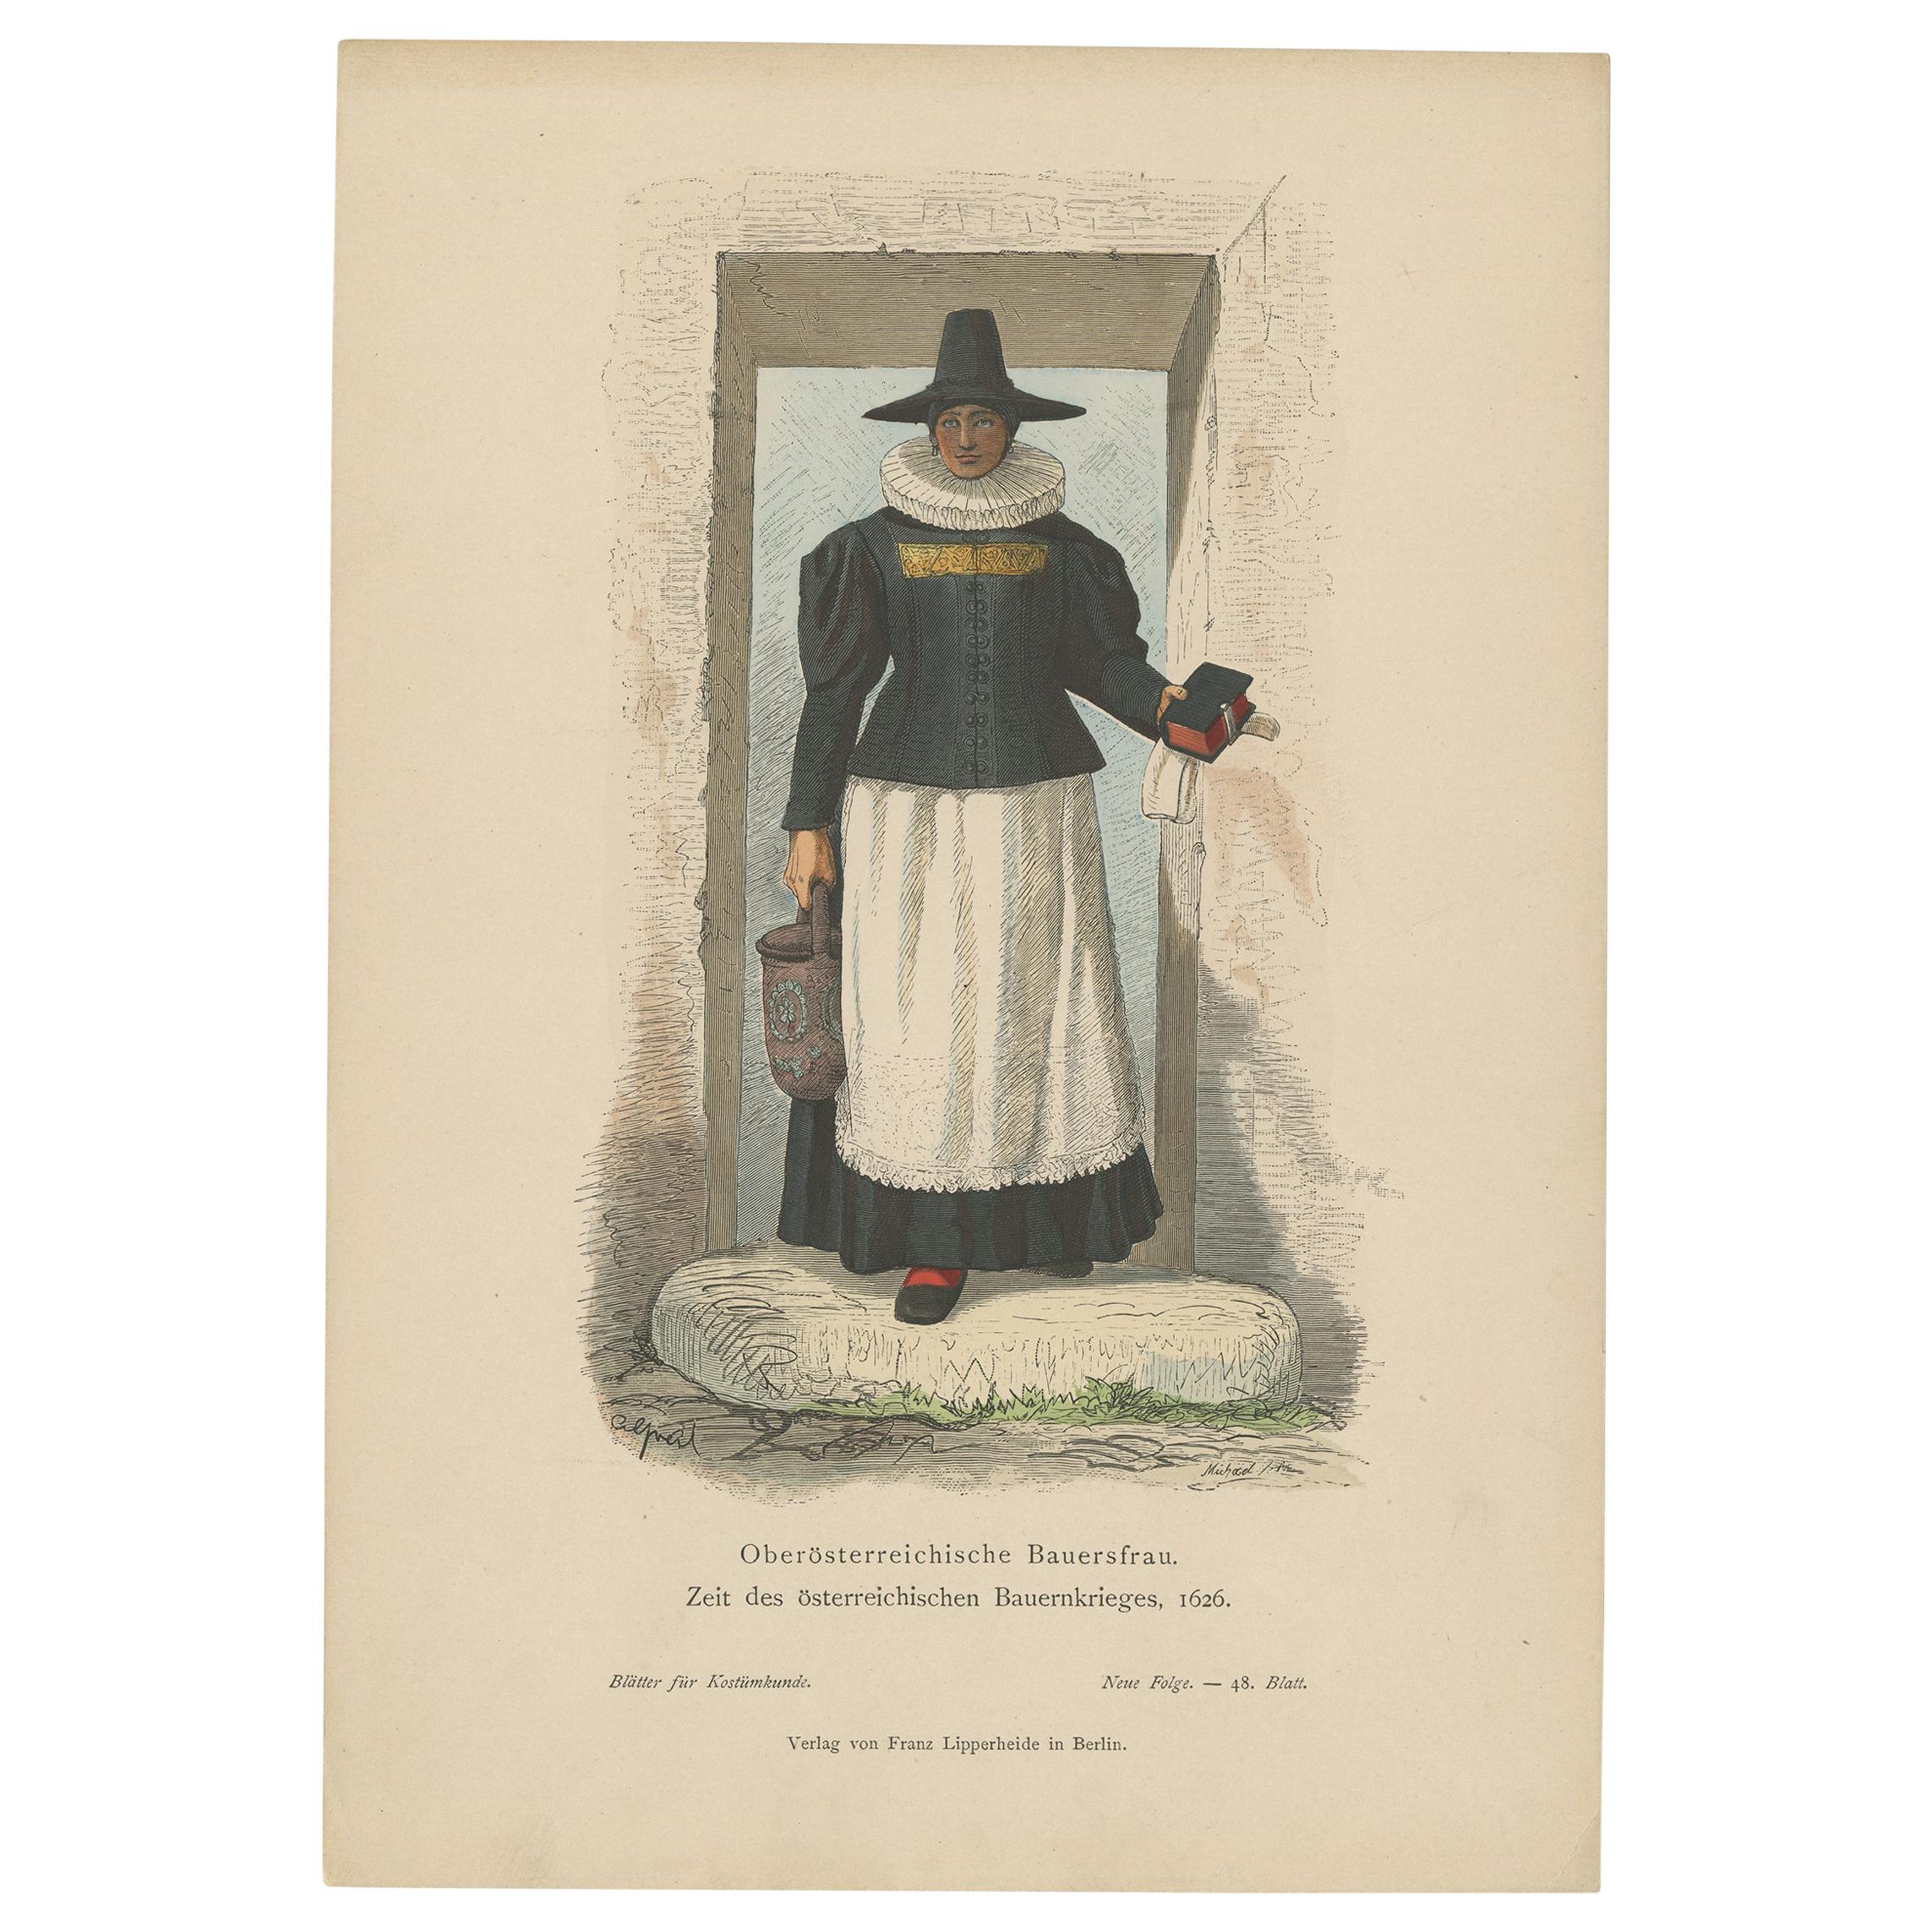 Antique Print of a Farmer's Wife from Upper Austria During the Peasant's War